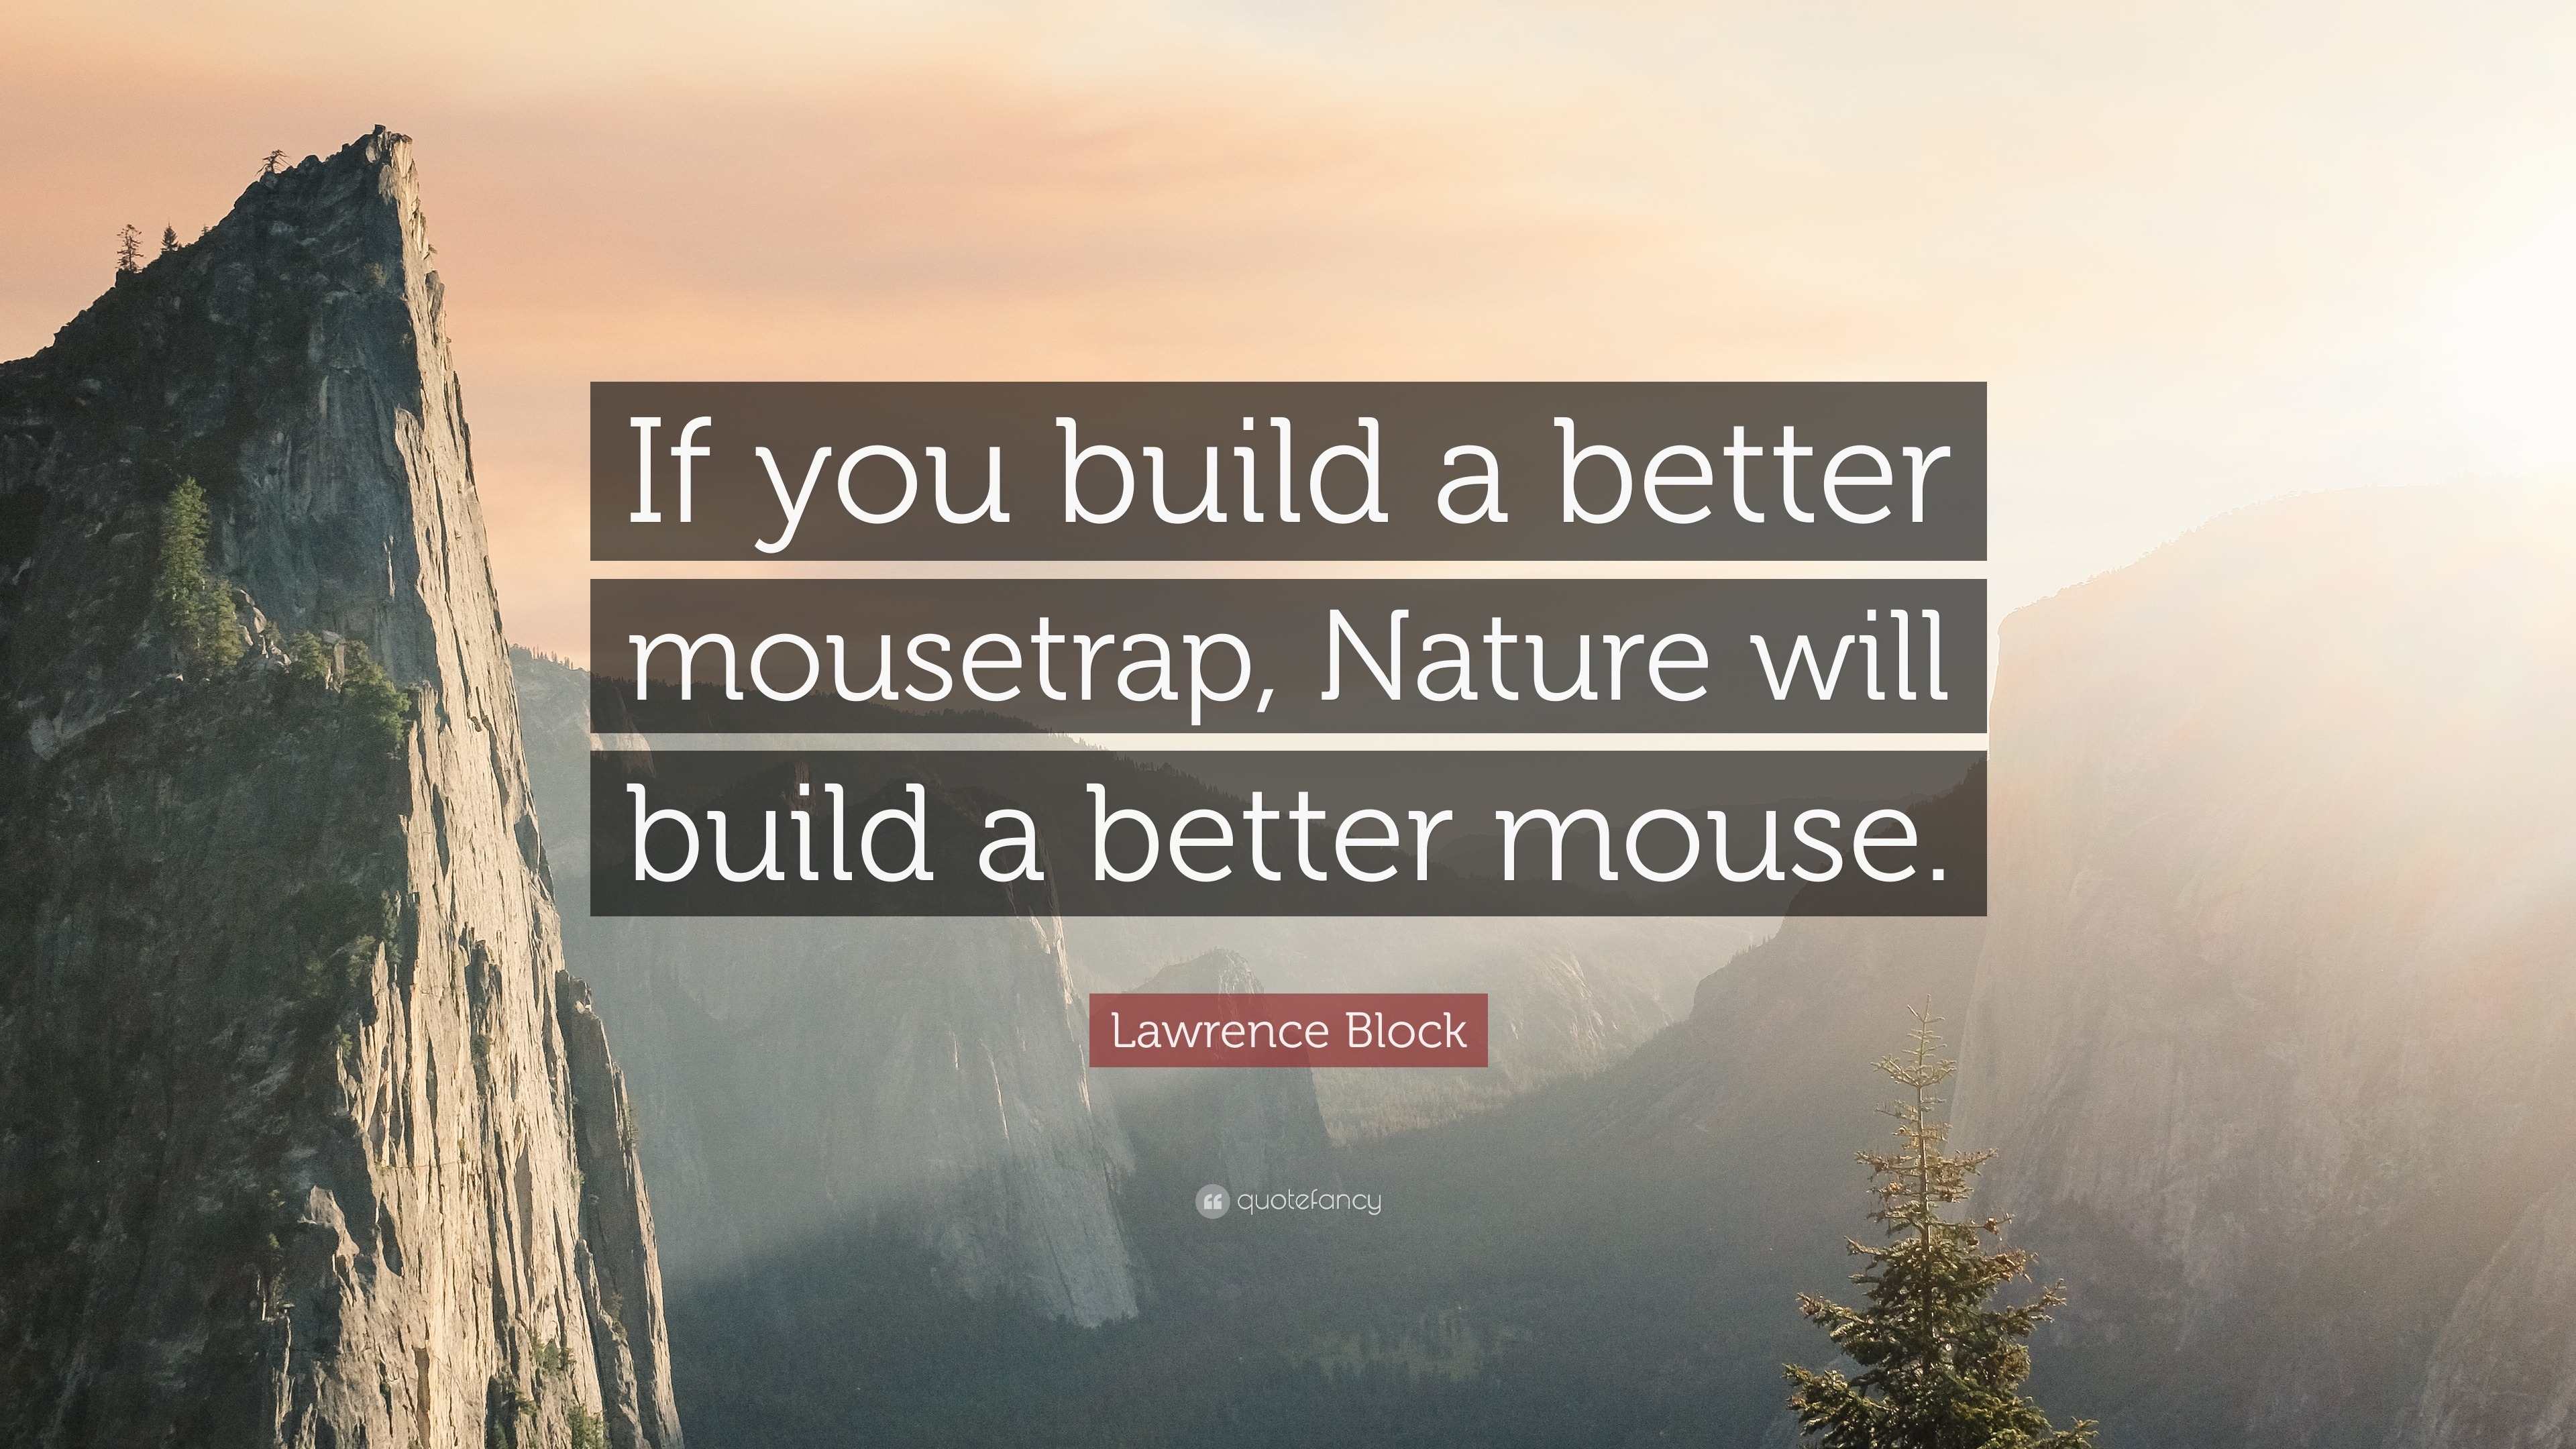 Lawrence Block Quote: “If you build a better mousetrap, Nature will build a  better mouse.”